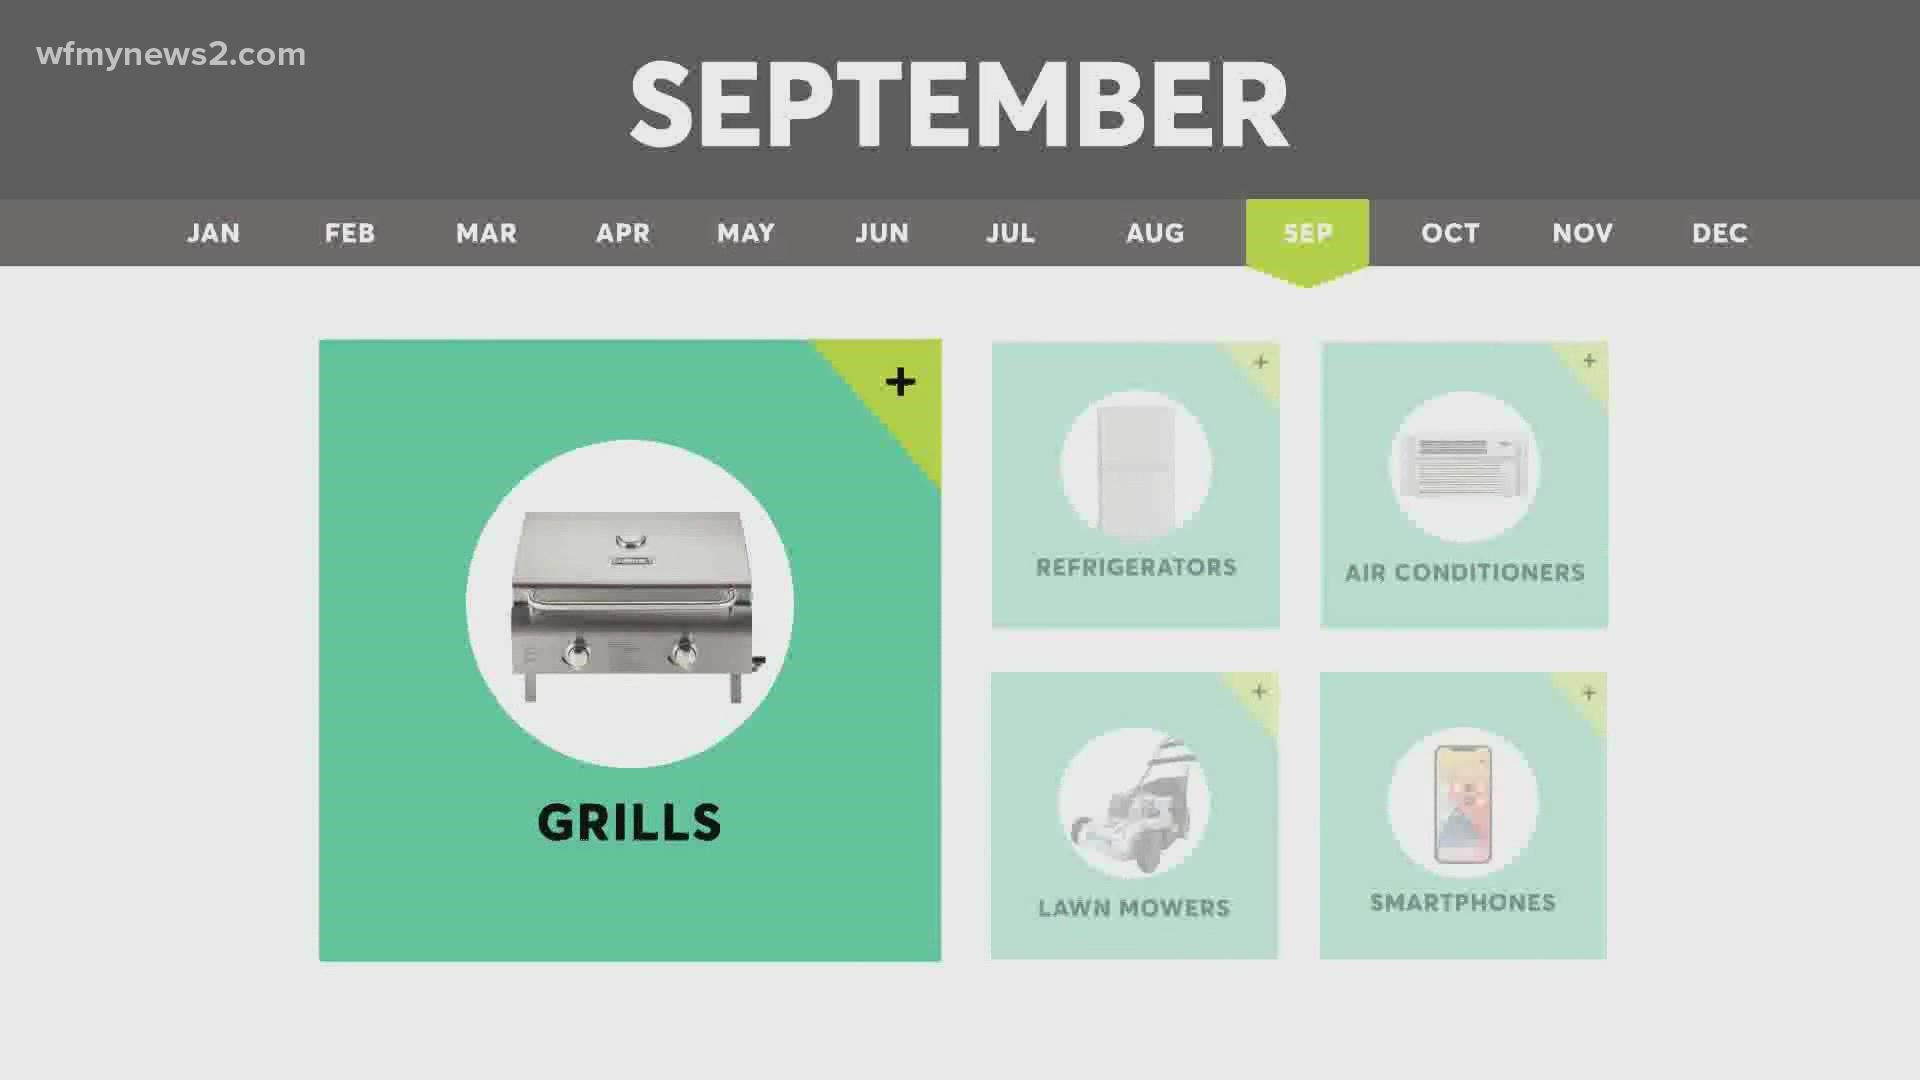 Grills, refrigerators, and air conditioners are all good buys for September, according to consumer reports.